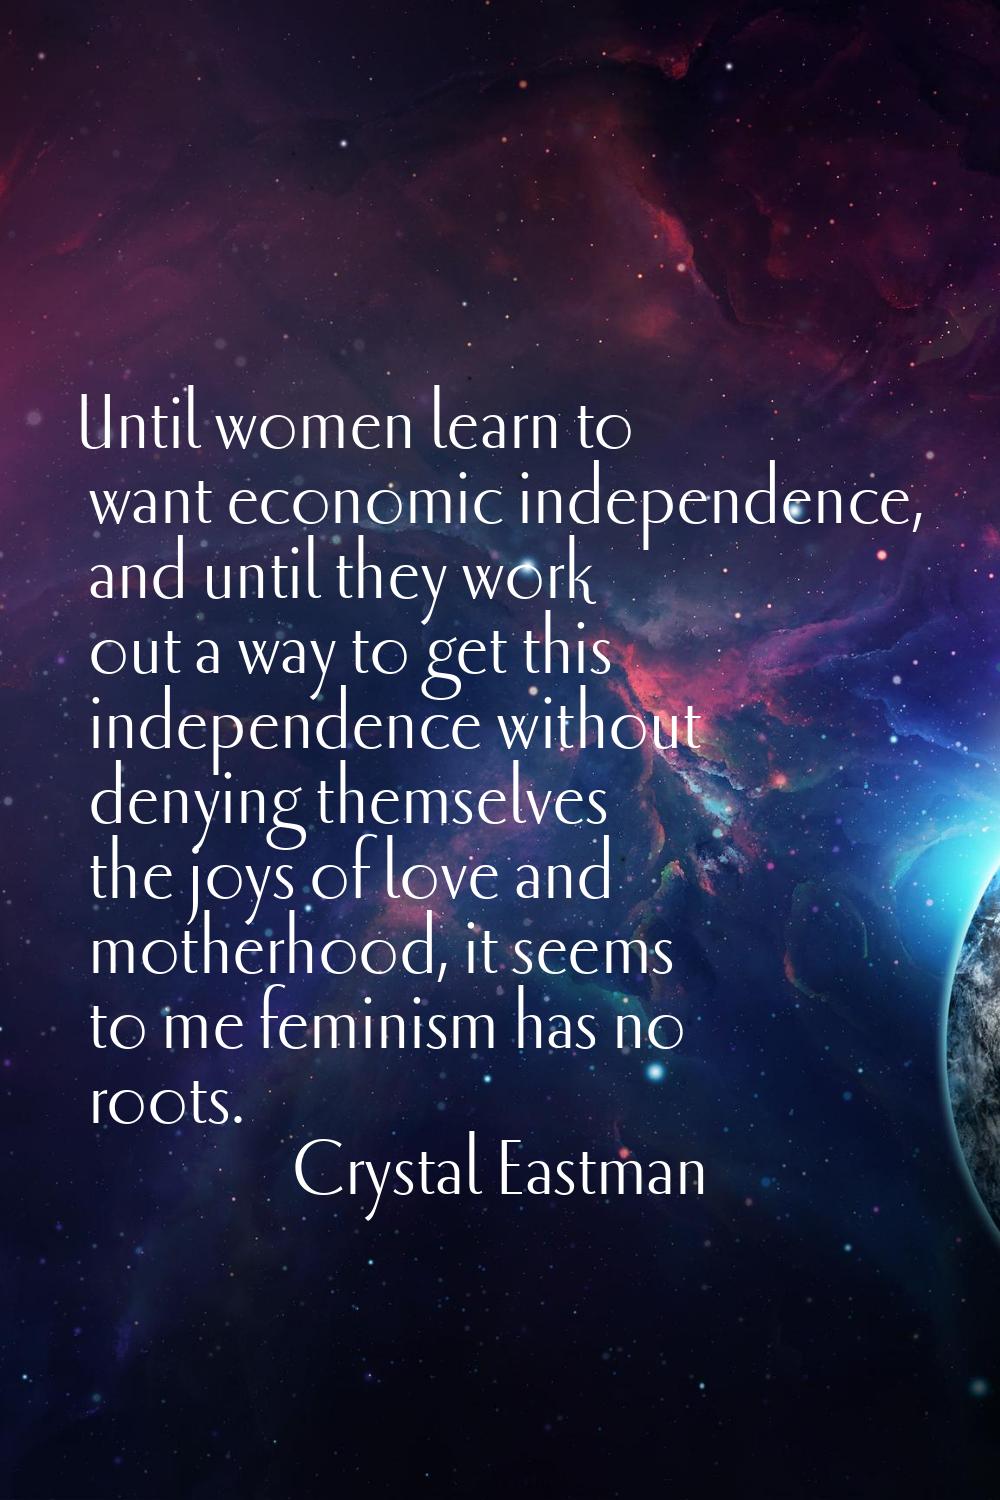 Until women learn to want economic independence, and until they work out a way to get this independ